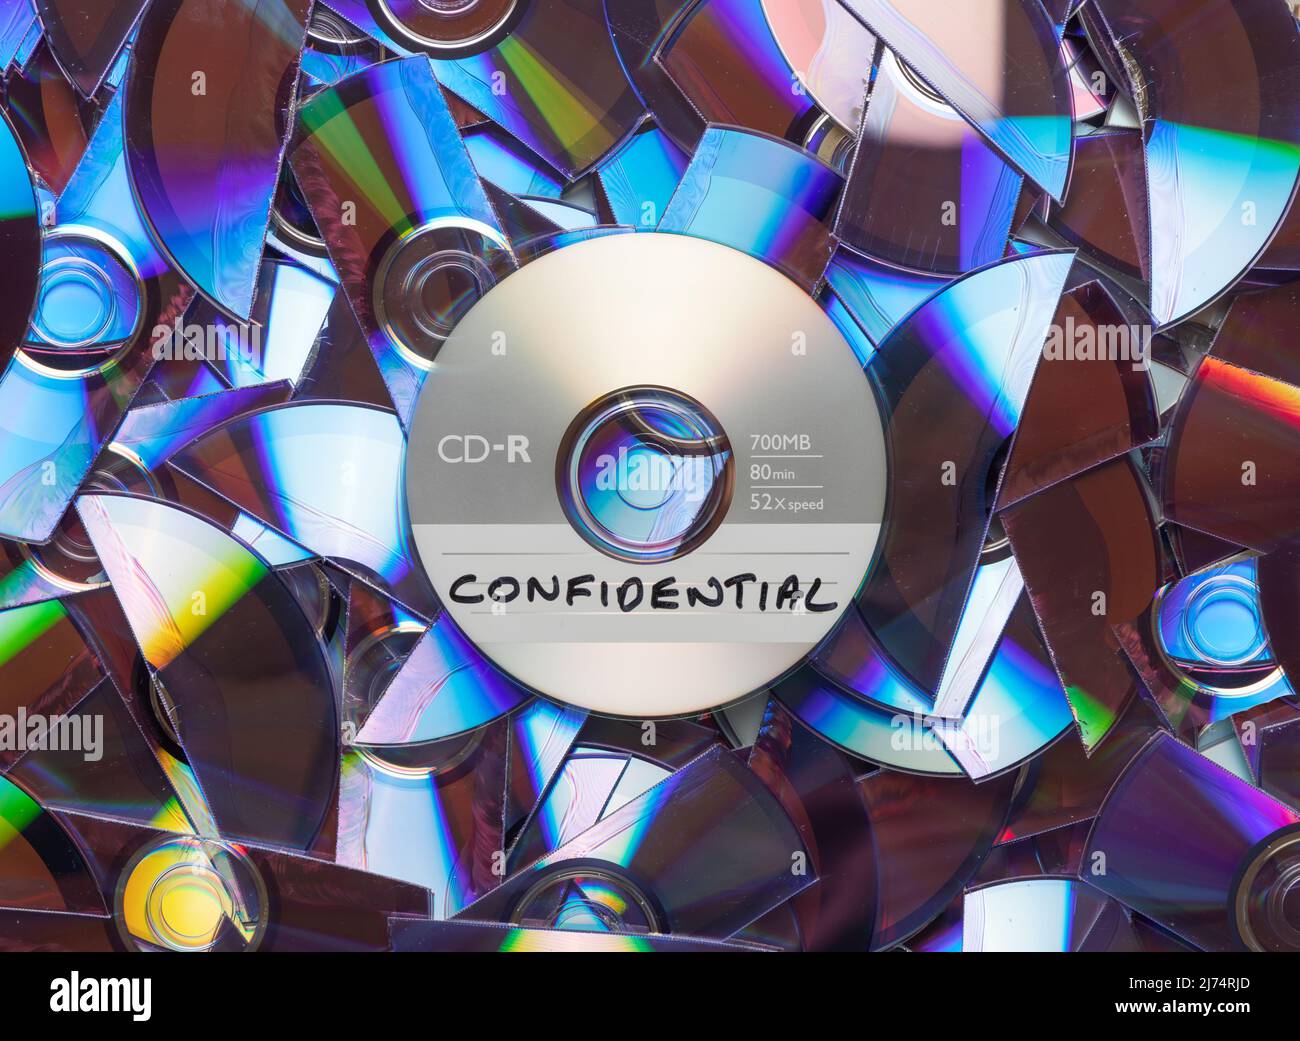 CD with confidential written on it, with shredded CD's and DVD's in the background. Stock Photo